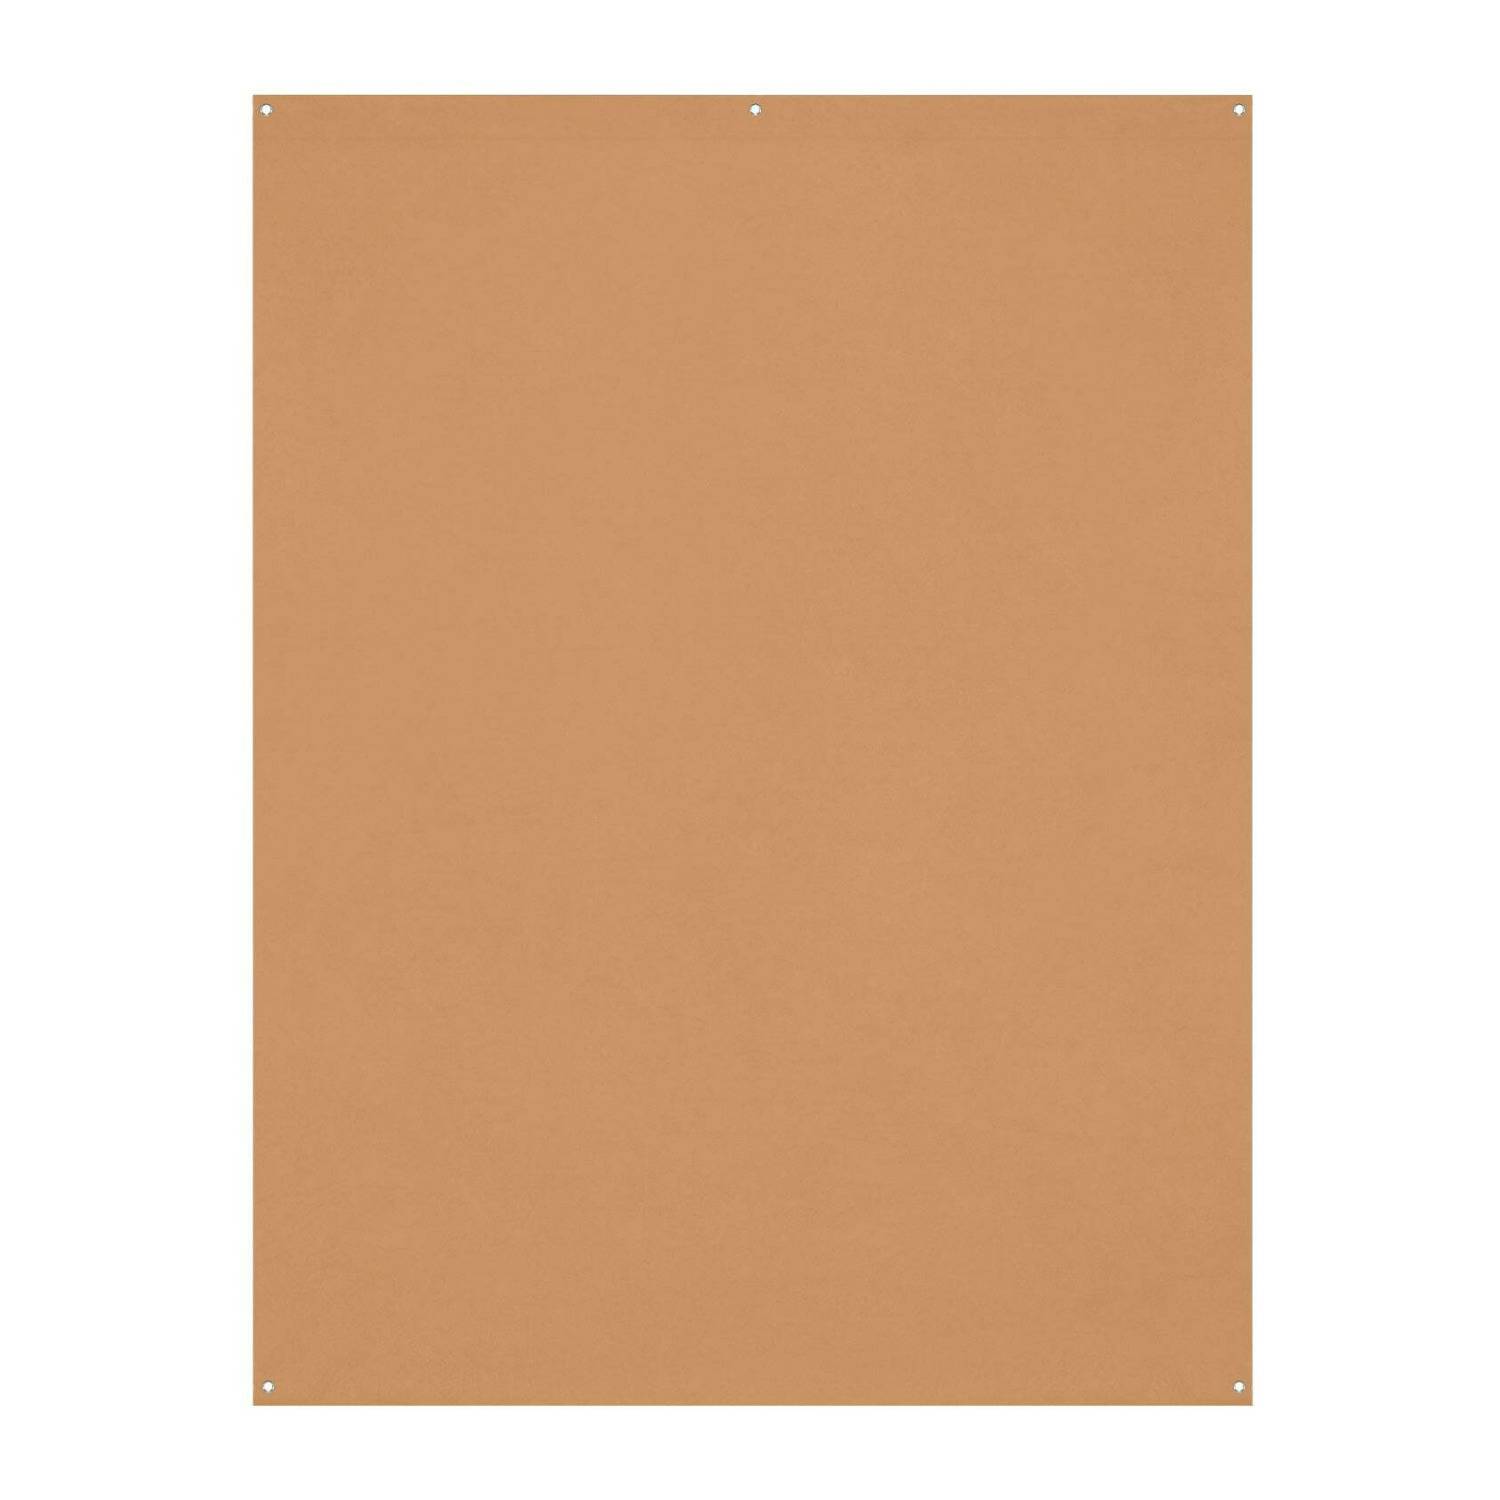 Westcott X-Drop Wrinkle-Resistant Backdrop Perfect for Video Conferencing (Brown Sugar, 5 x 7 Feet)